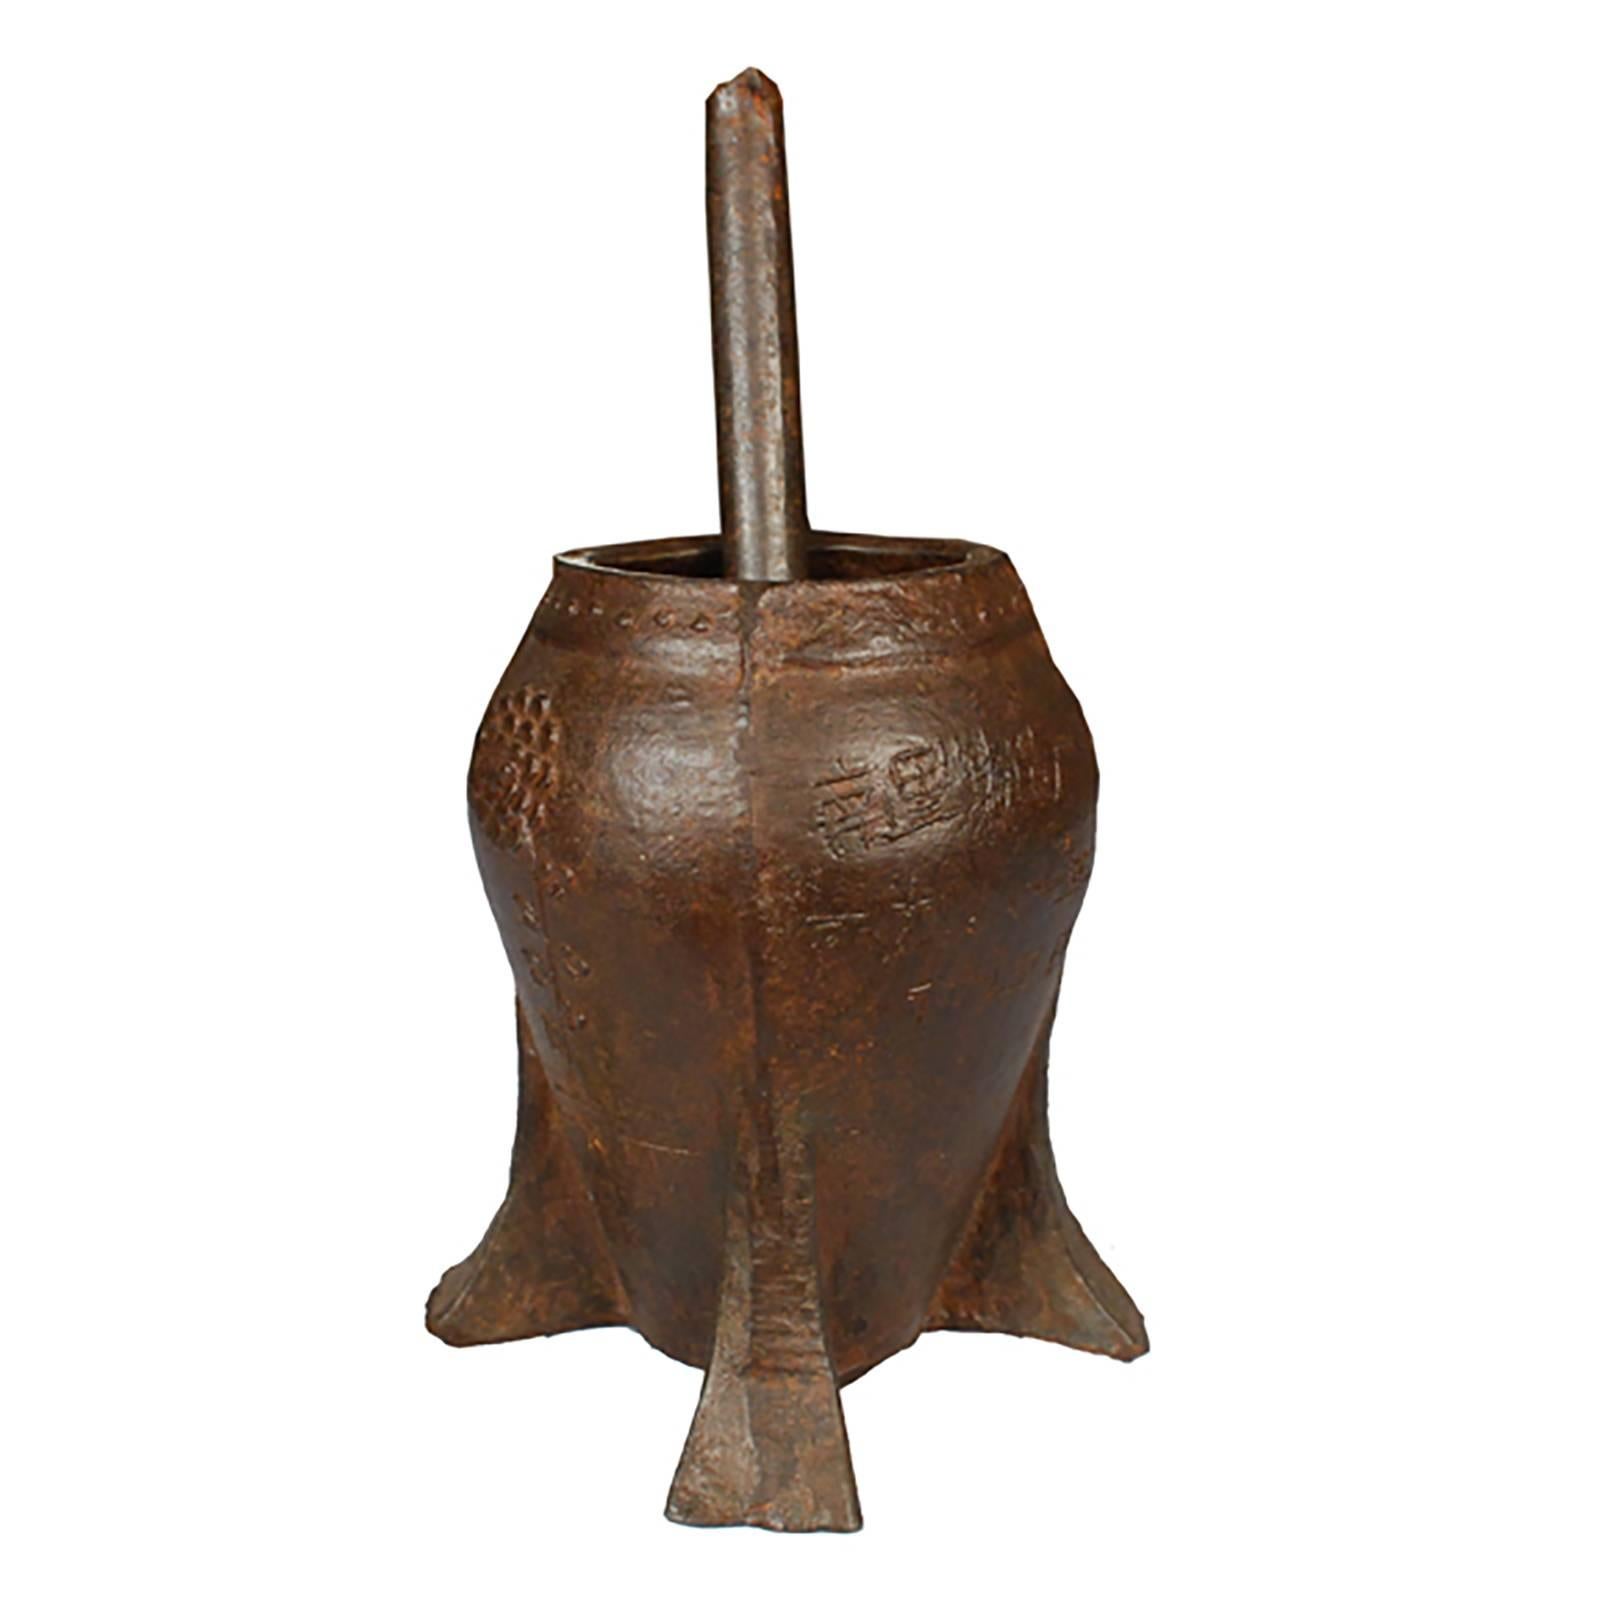 This vintage mortar and pestle from Shanxi, China was cast in iron with a floral relief. It was originally used in a traditional apothecary to create herbal medicine.